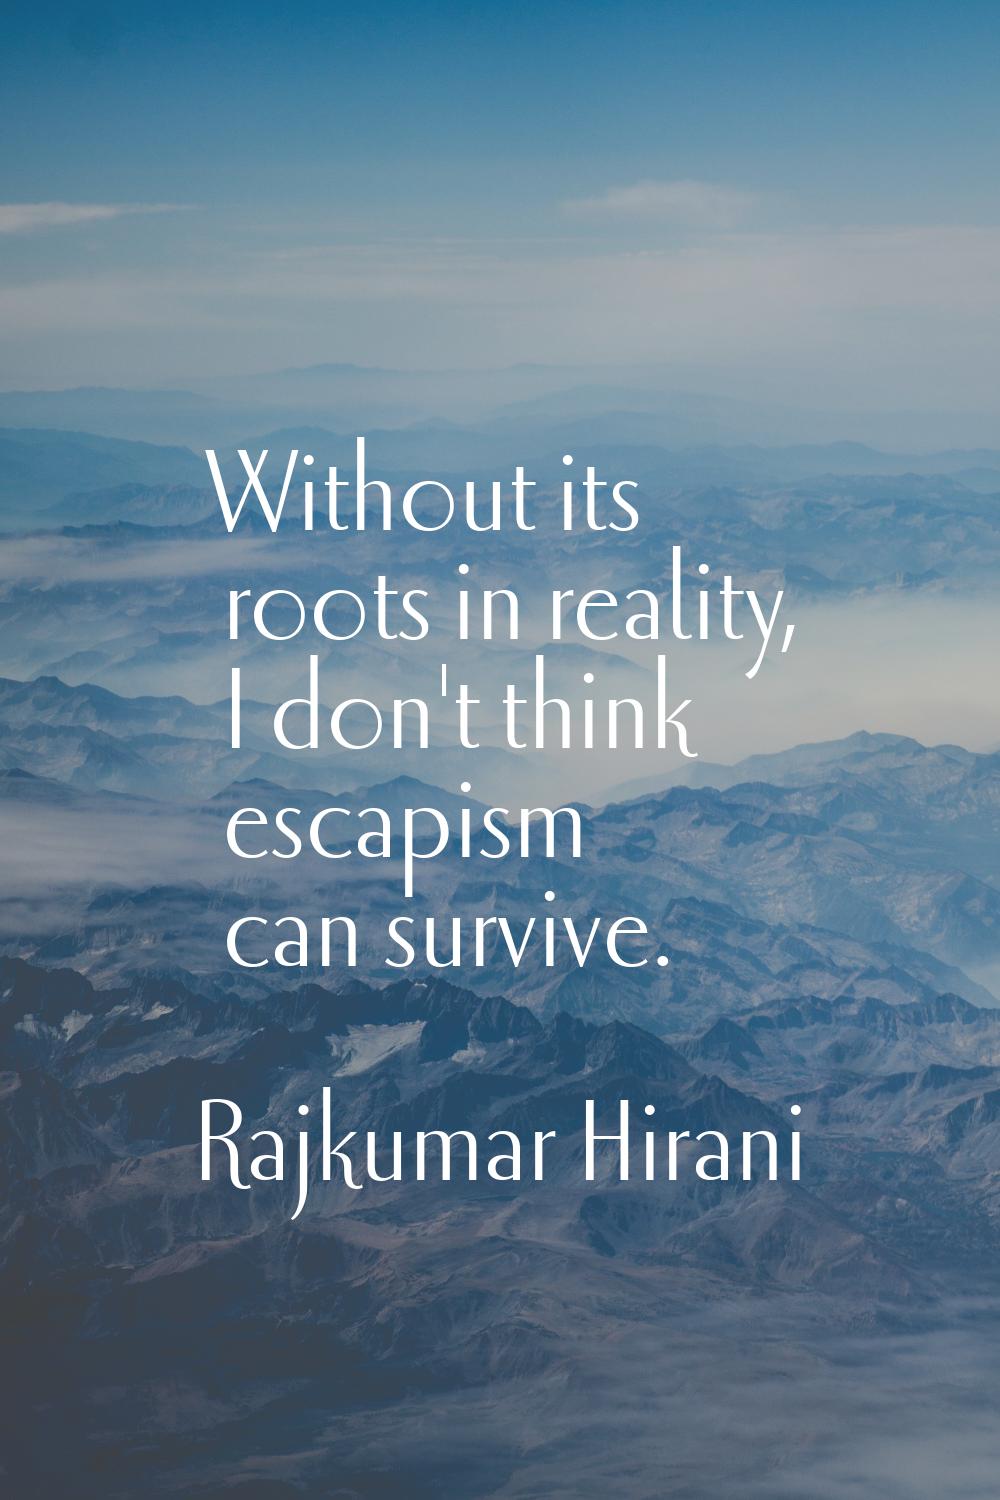 Without its roots in reality, I don't think escapism can survive.